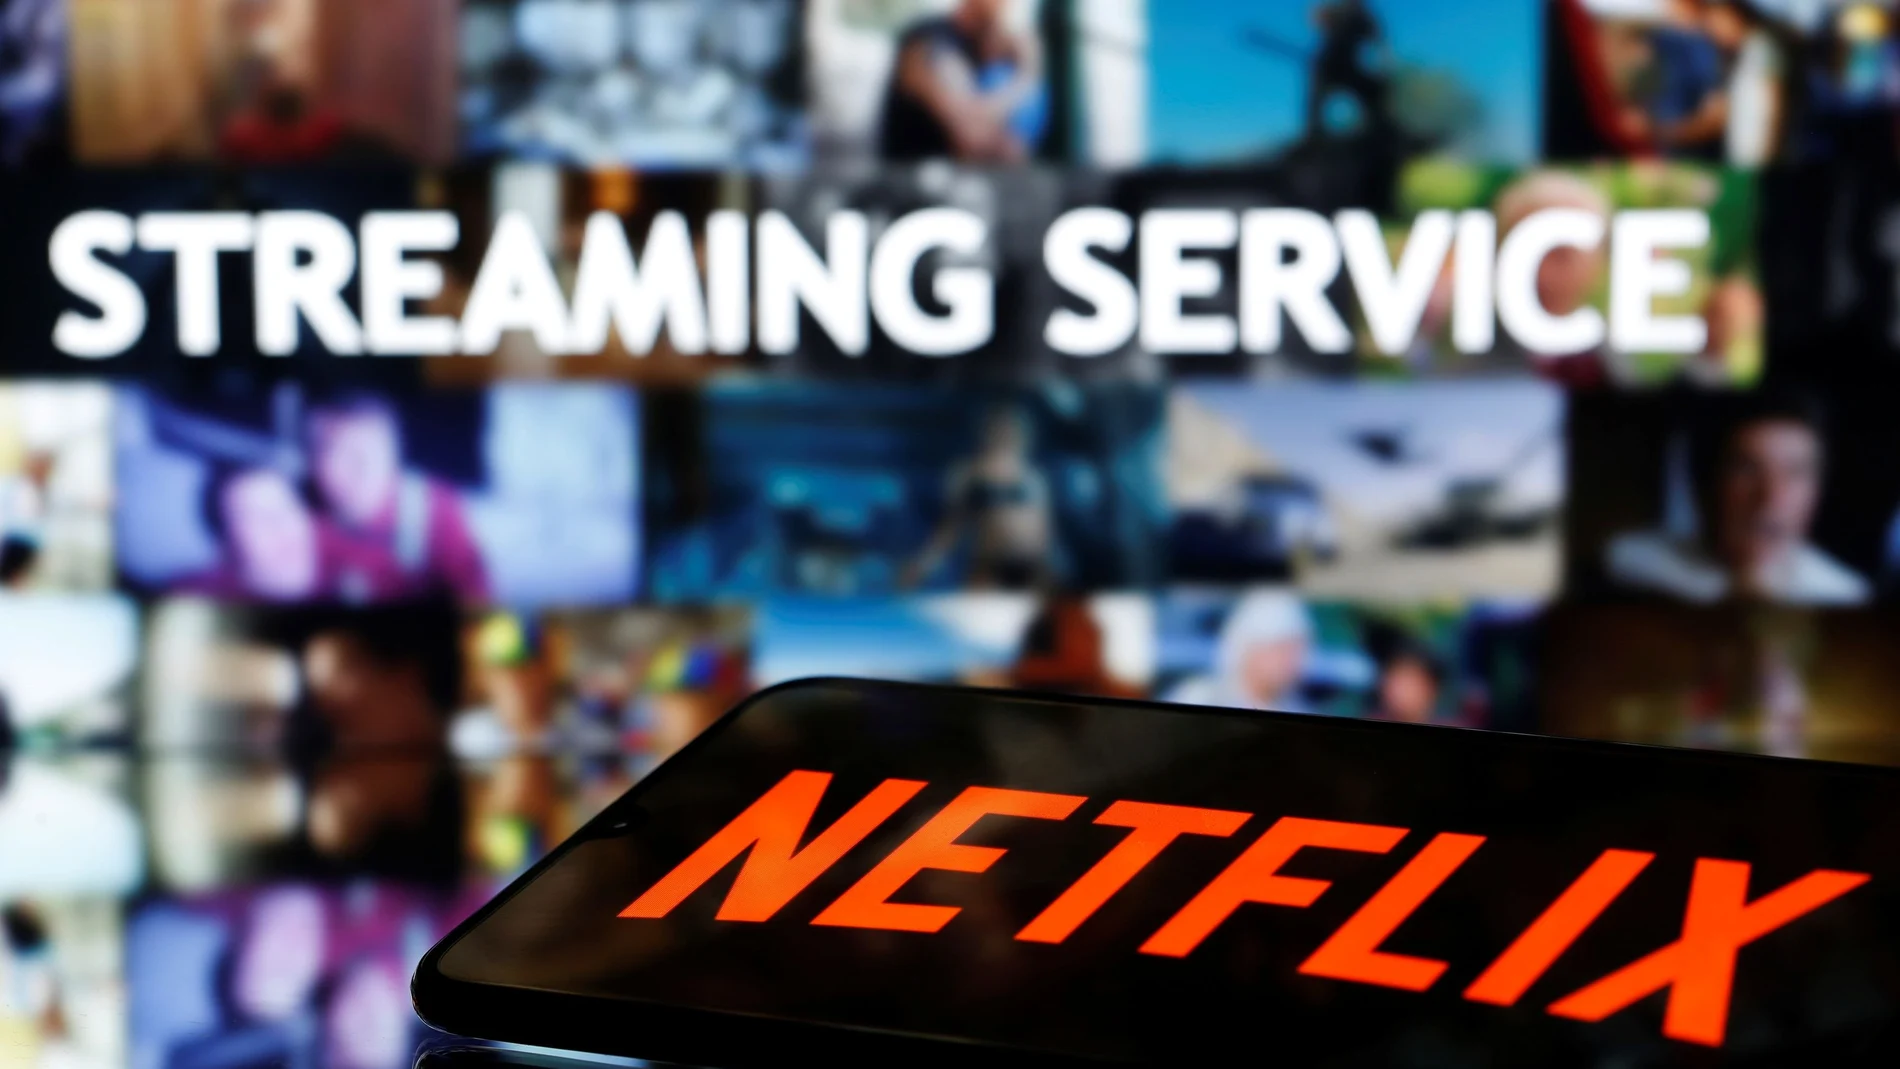 A smartphone with the Netflix logo lies in front of displayed "Streaming service" words in this illustration